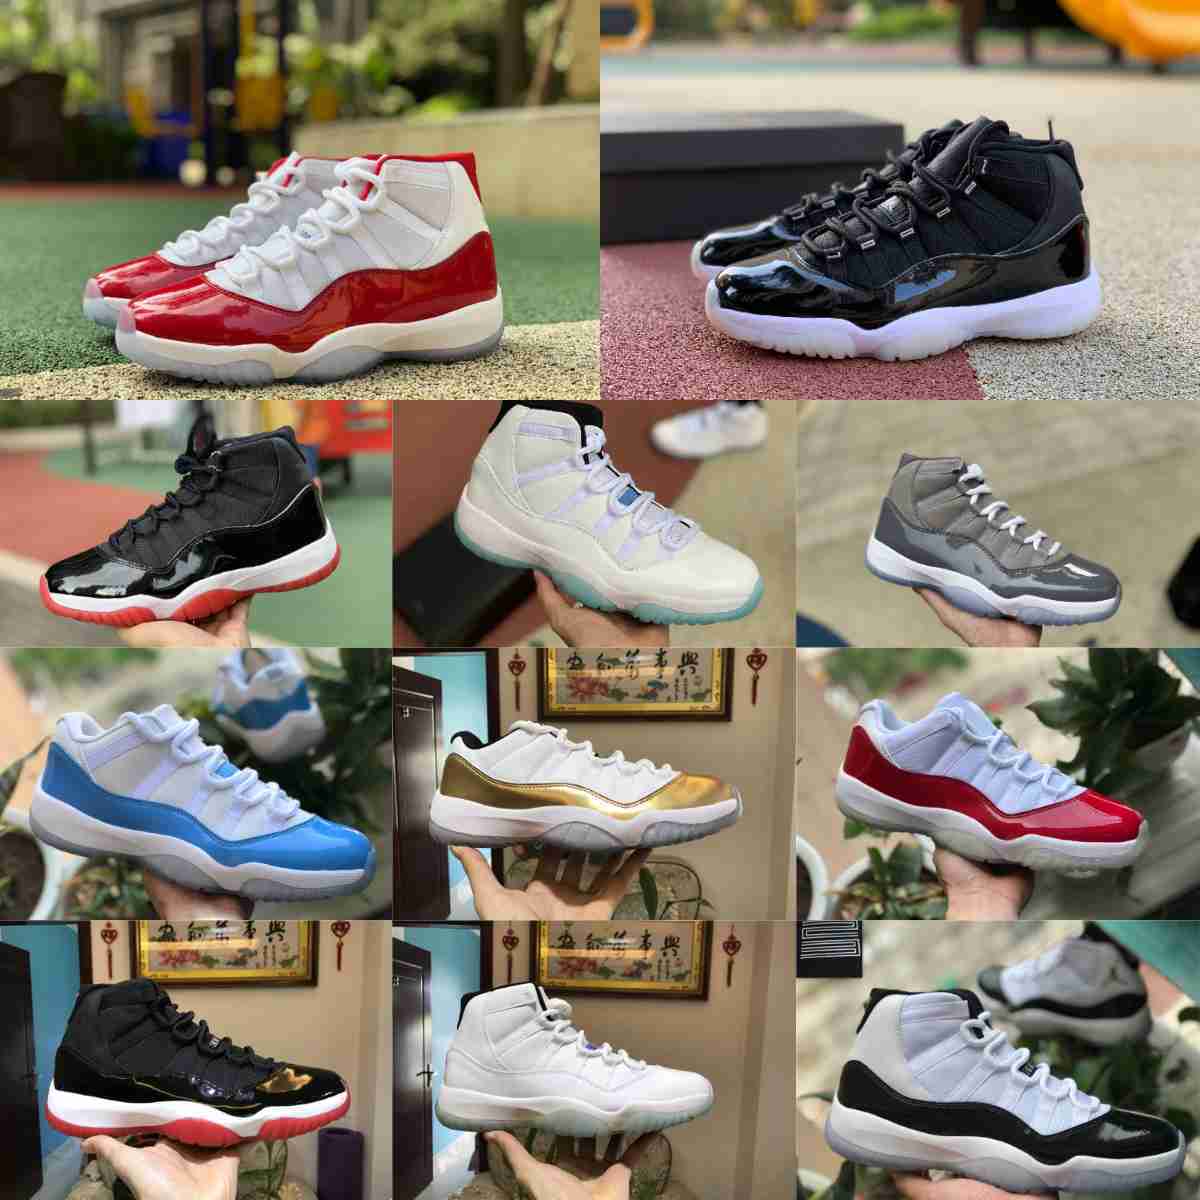 Jumpman Cherry Red 11 11s High Basketball Shoes Win Like Concord Easter Columbia Midnight Navy COOL GREY Legend Blue Midnight Navy Cherry Space Jam Trainer Sneakers